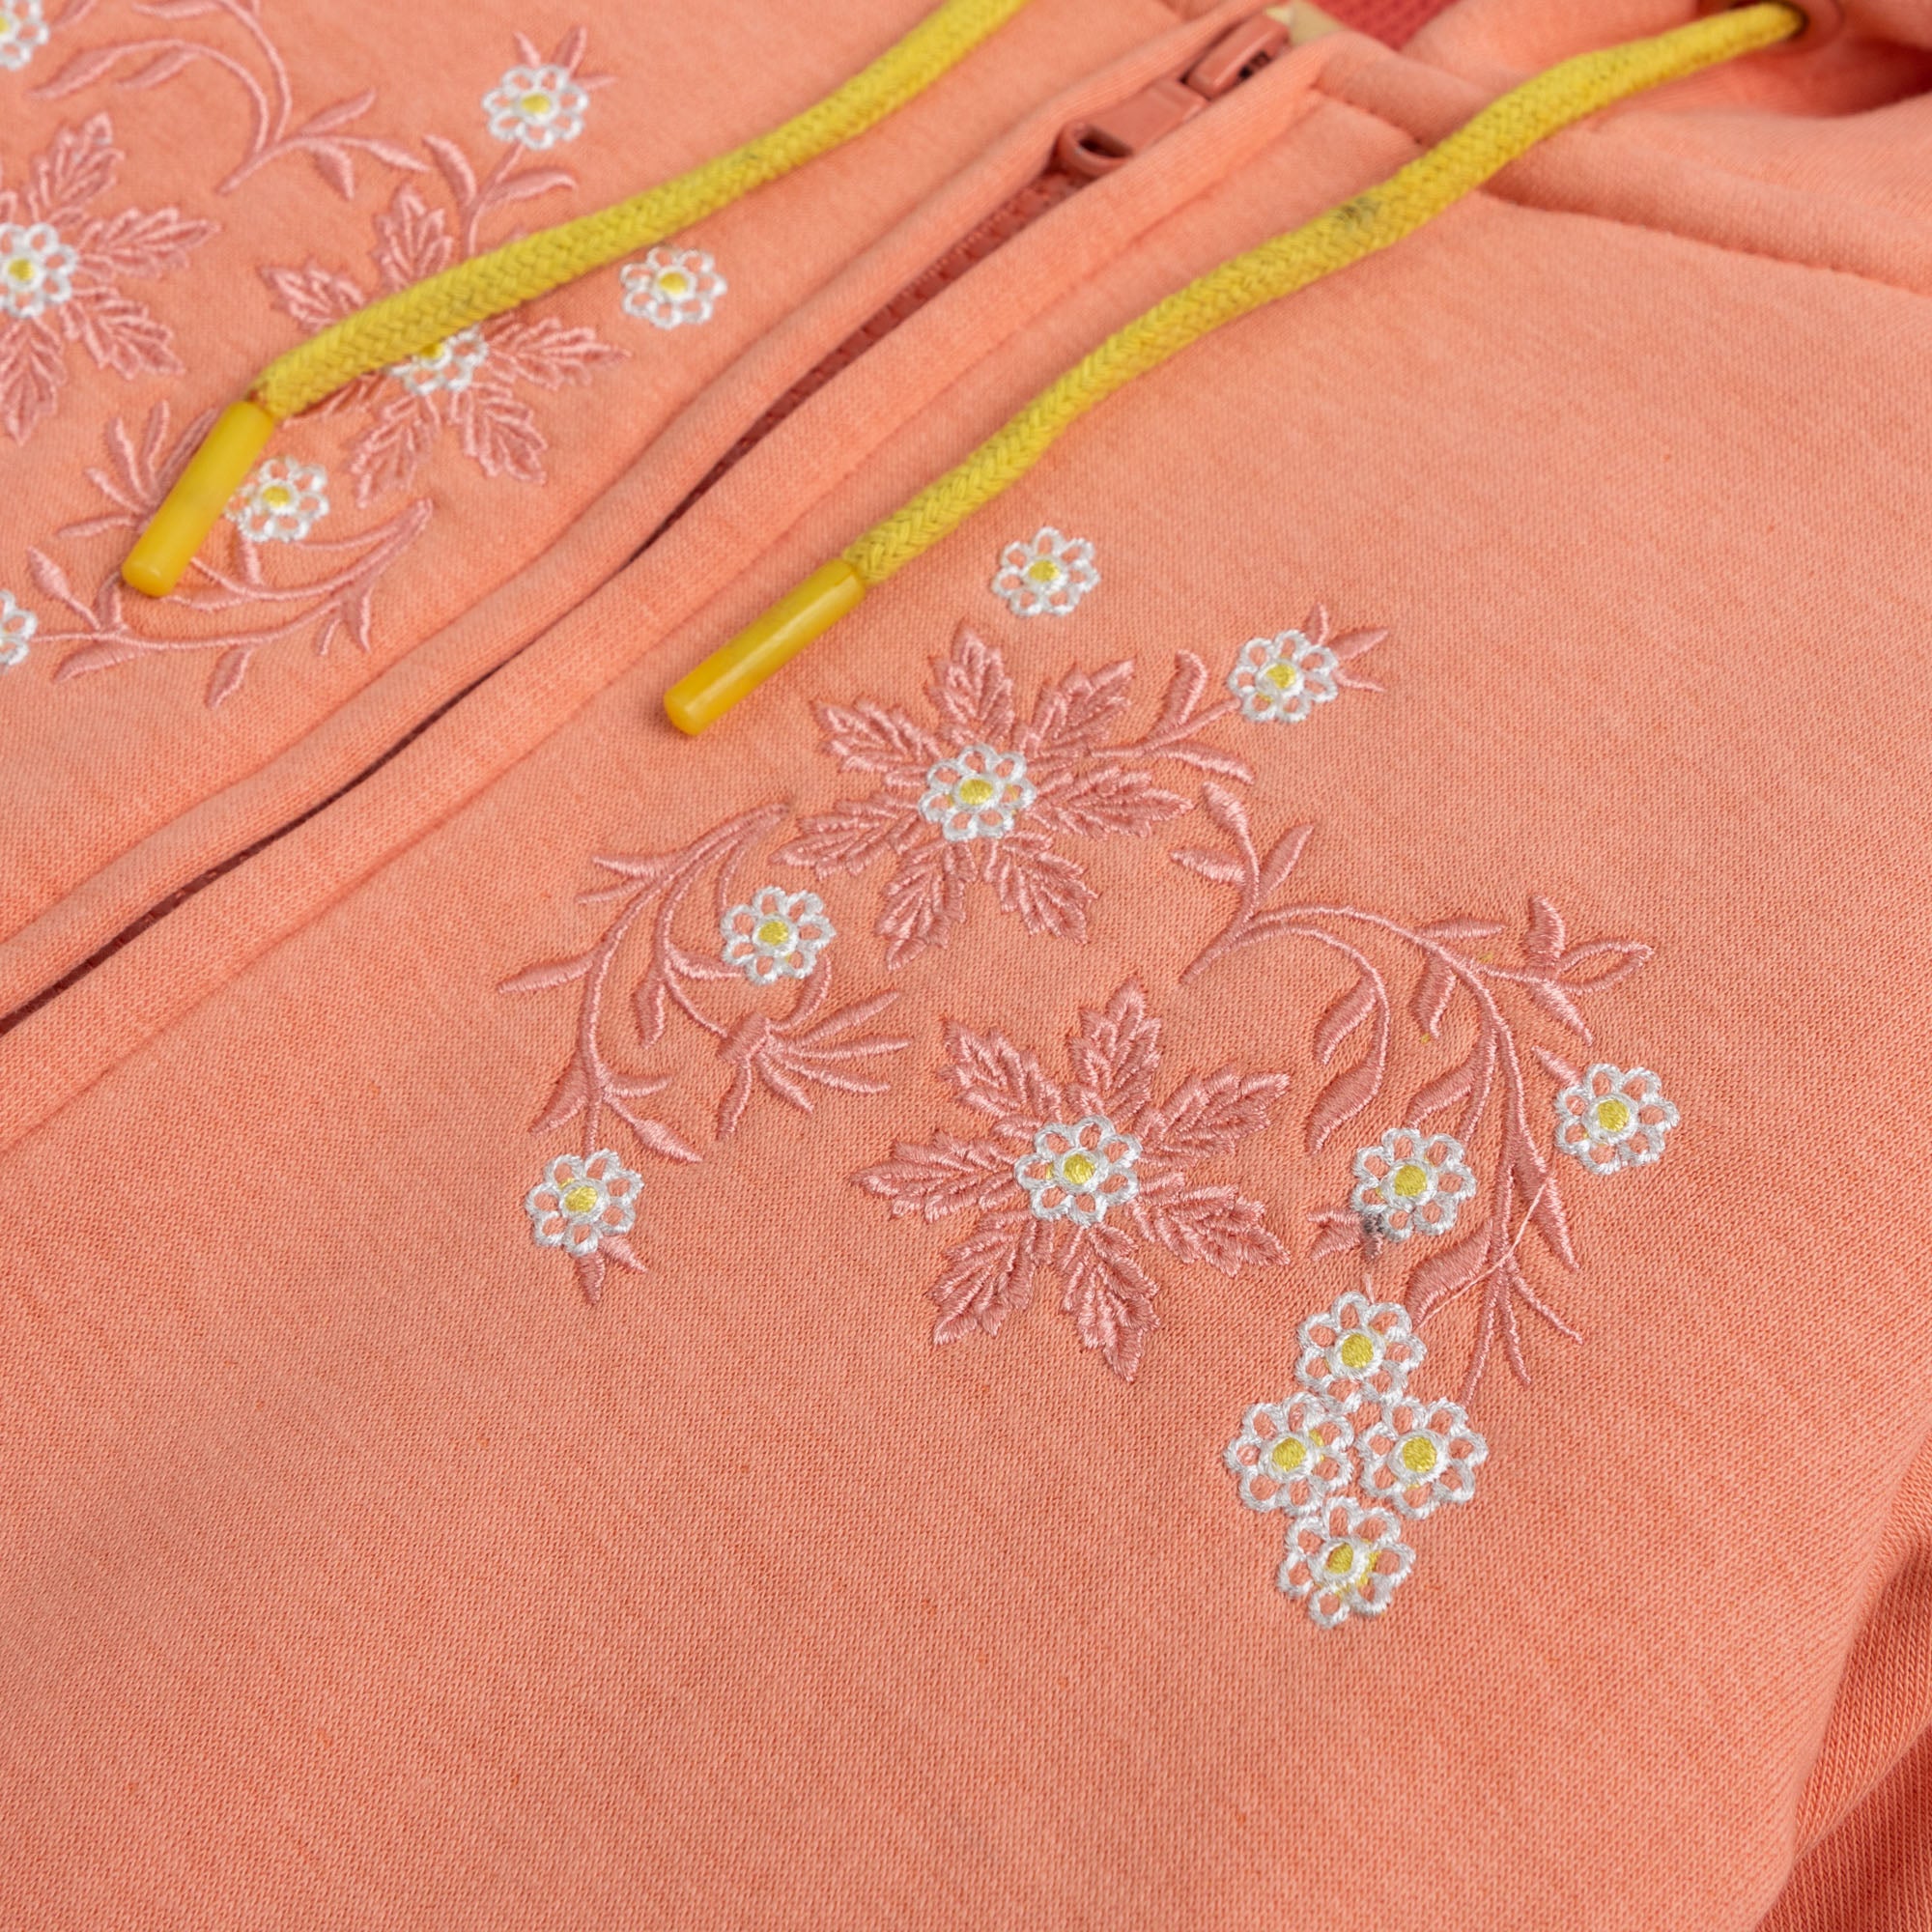 Peachy Pink Embroidered Hoodie